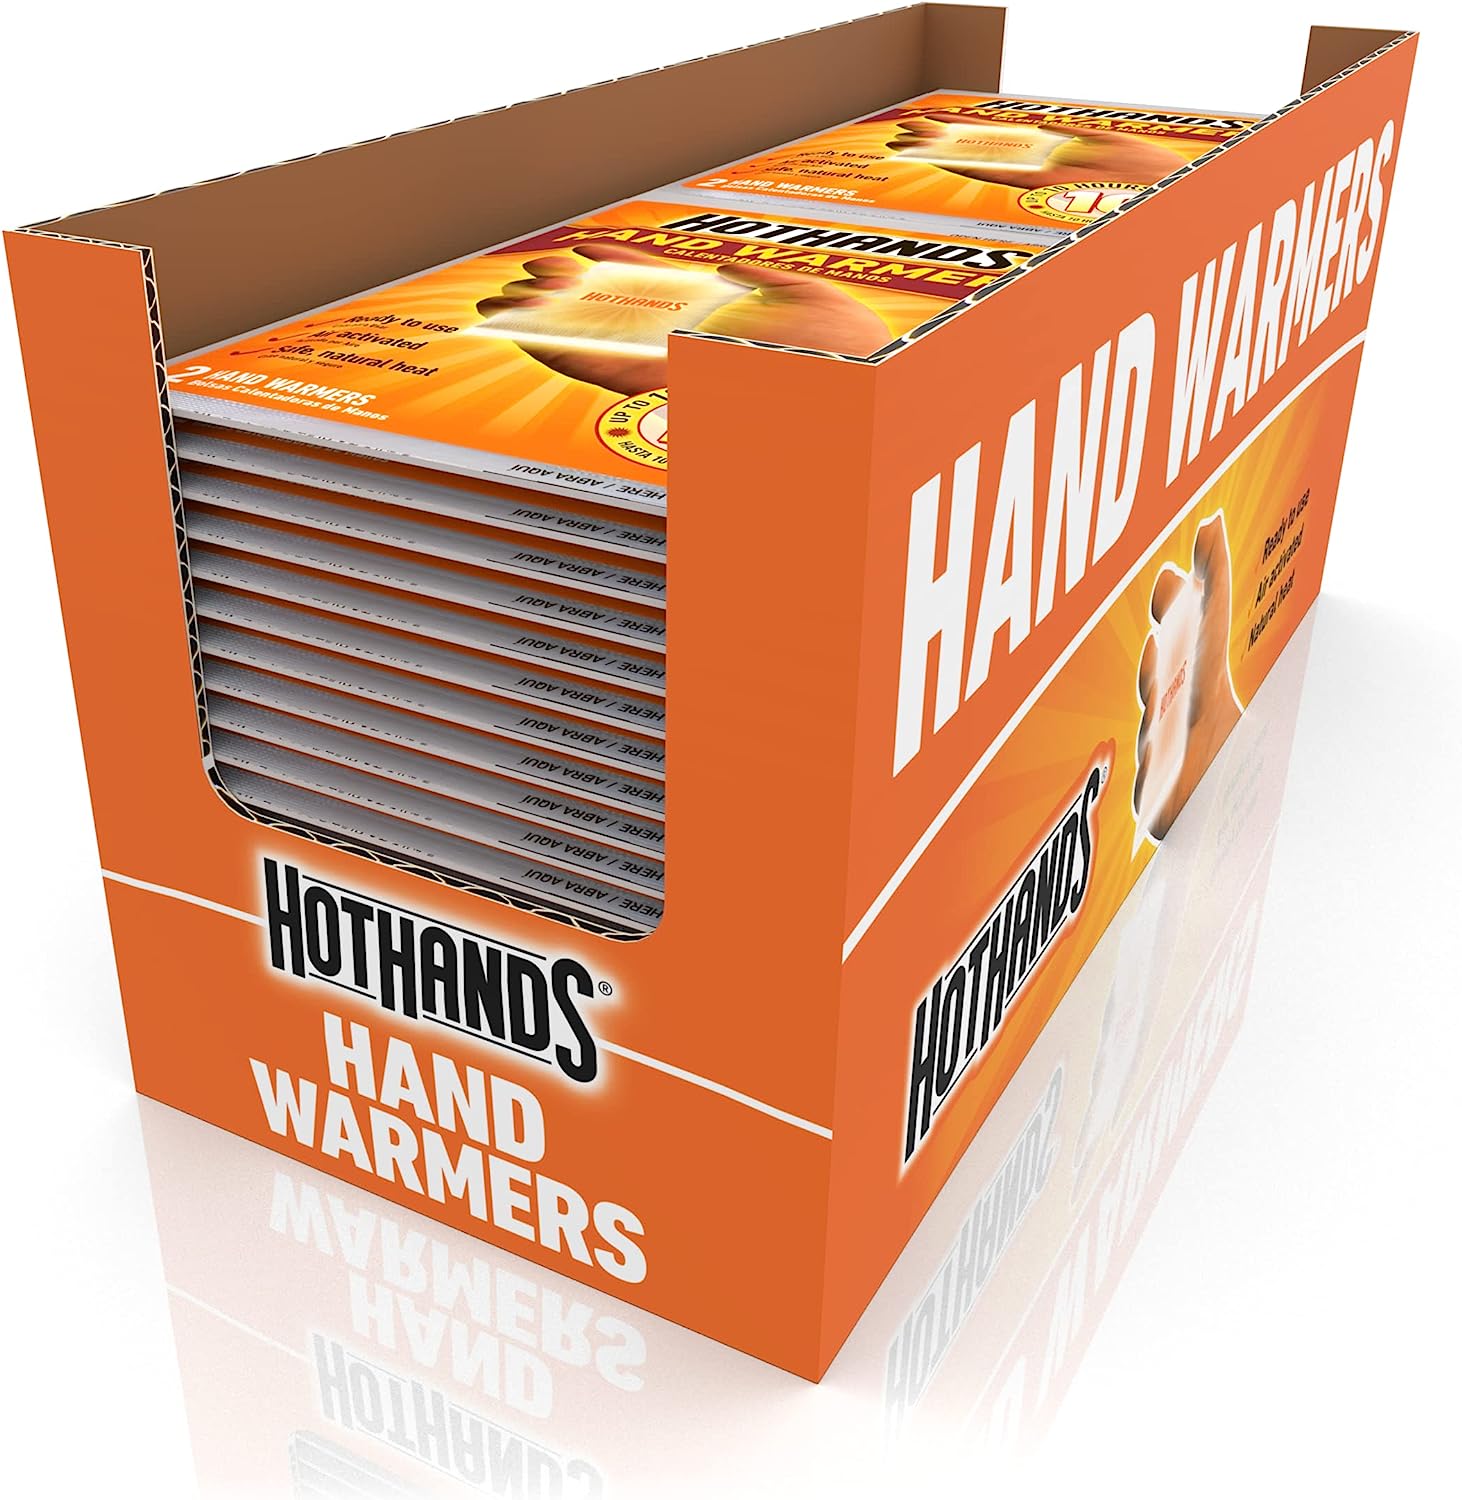 Read more about the article HotHands Hand Warmers Best Review: Keeping You Warm and Cozy for Hours